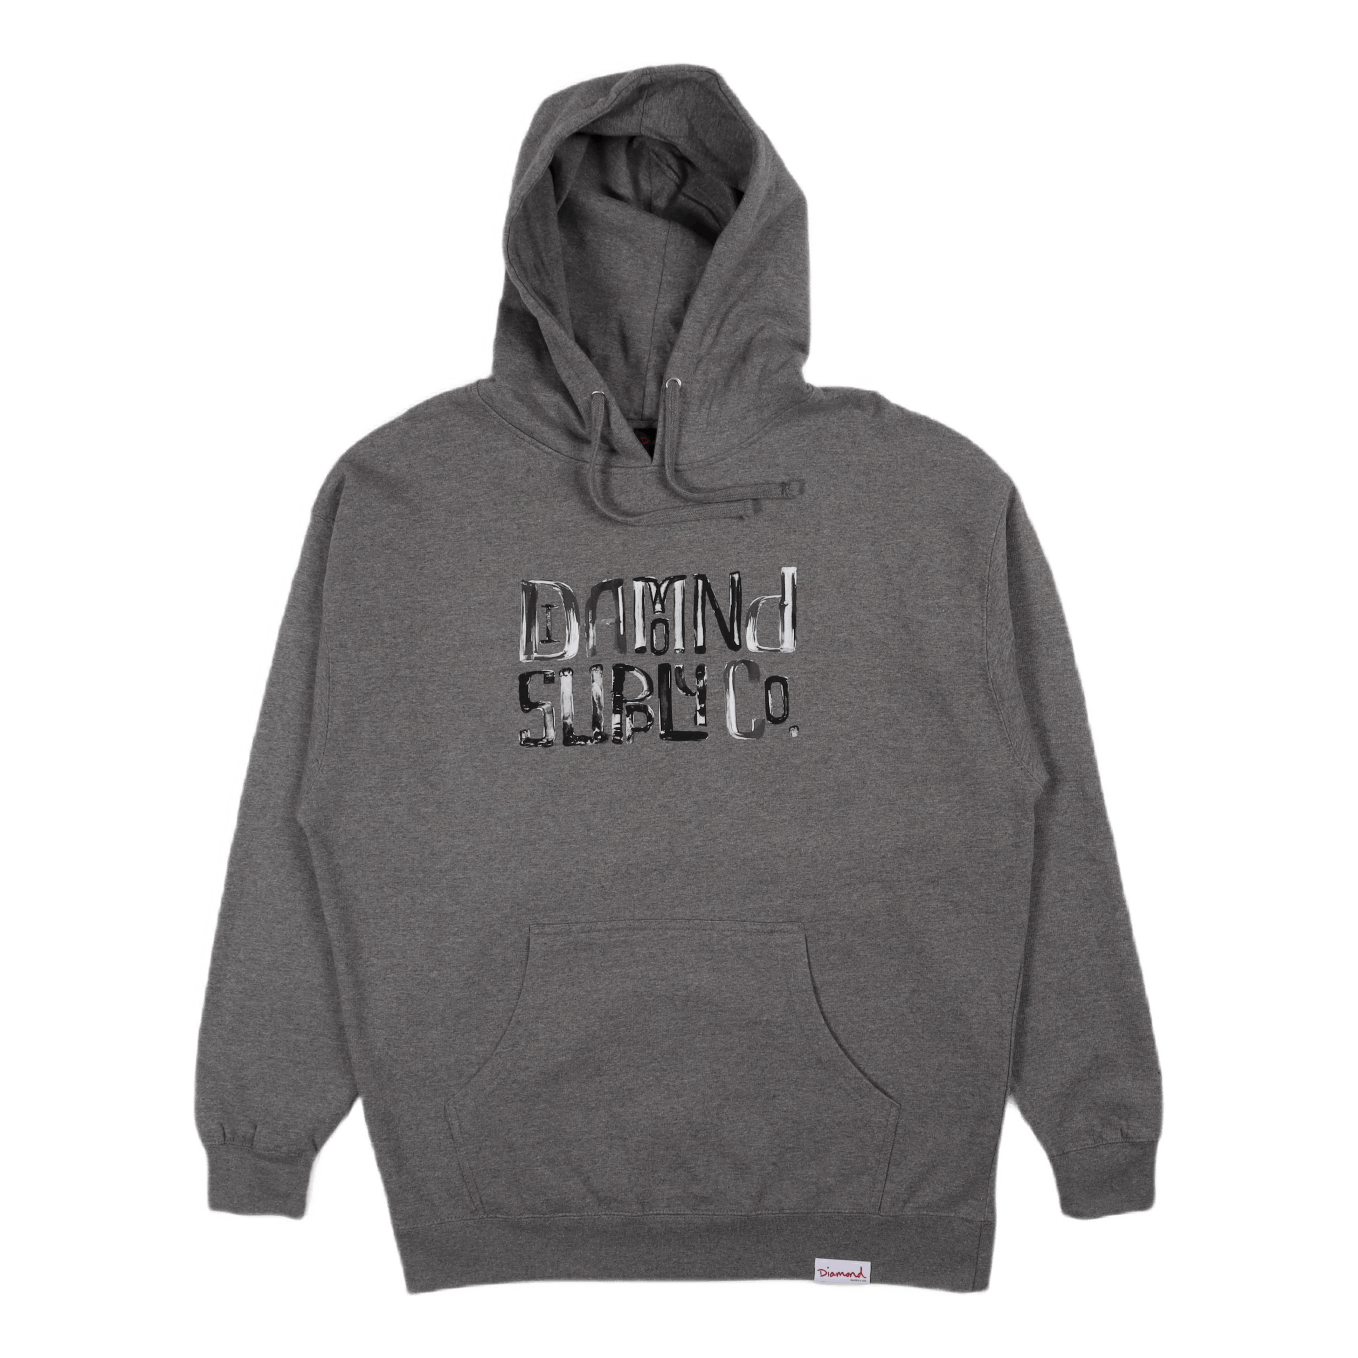 Downtown Signature Hoodie Gray